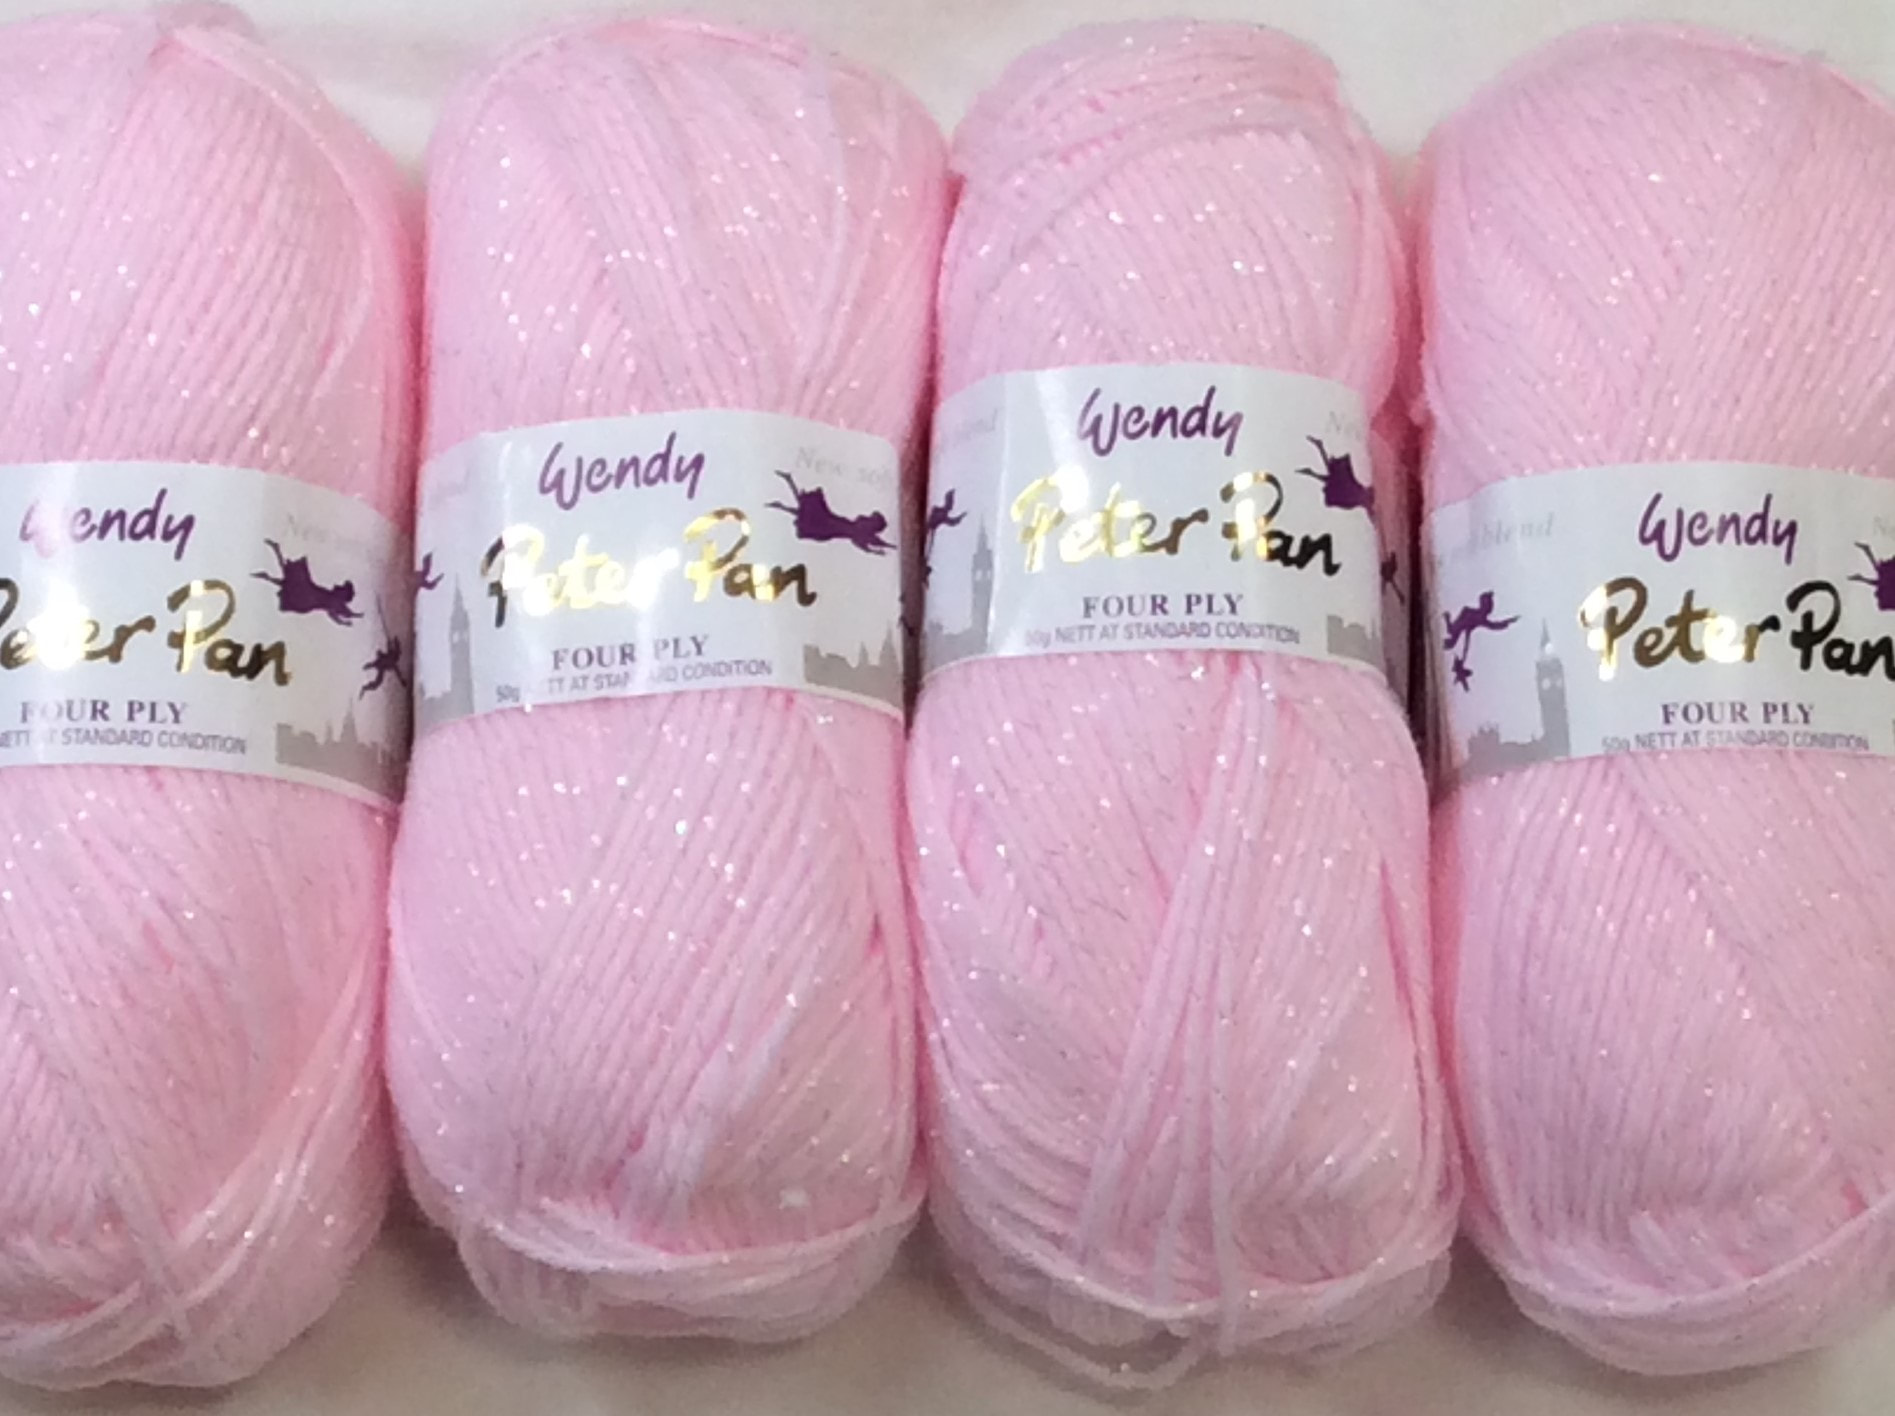 Wendy Nylonette wool blend Botany wool pink 3 ply five  1 oz skeins Made in England  1950s